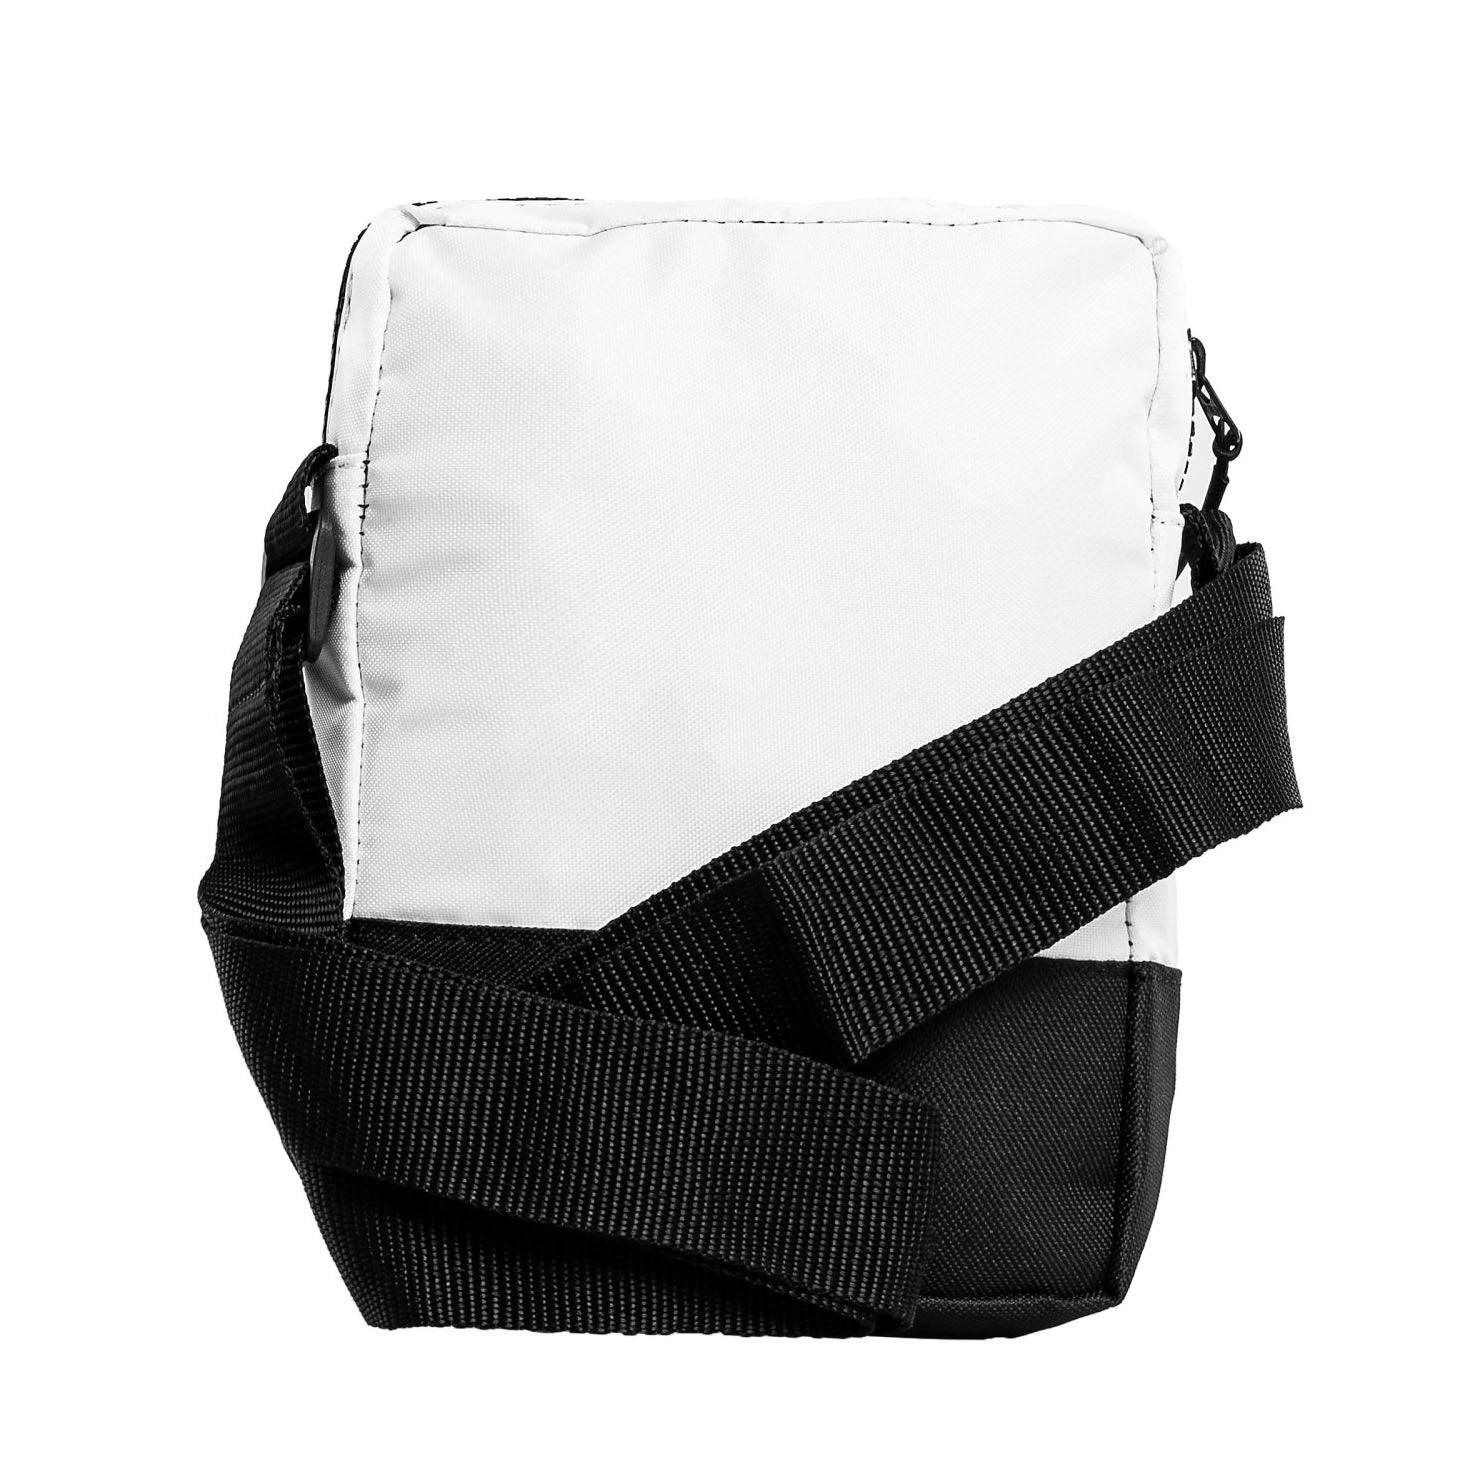 Morral Roxy All Crossed Up Blanco Negro - Indy